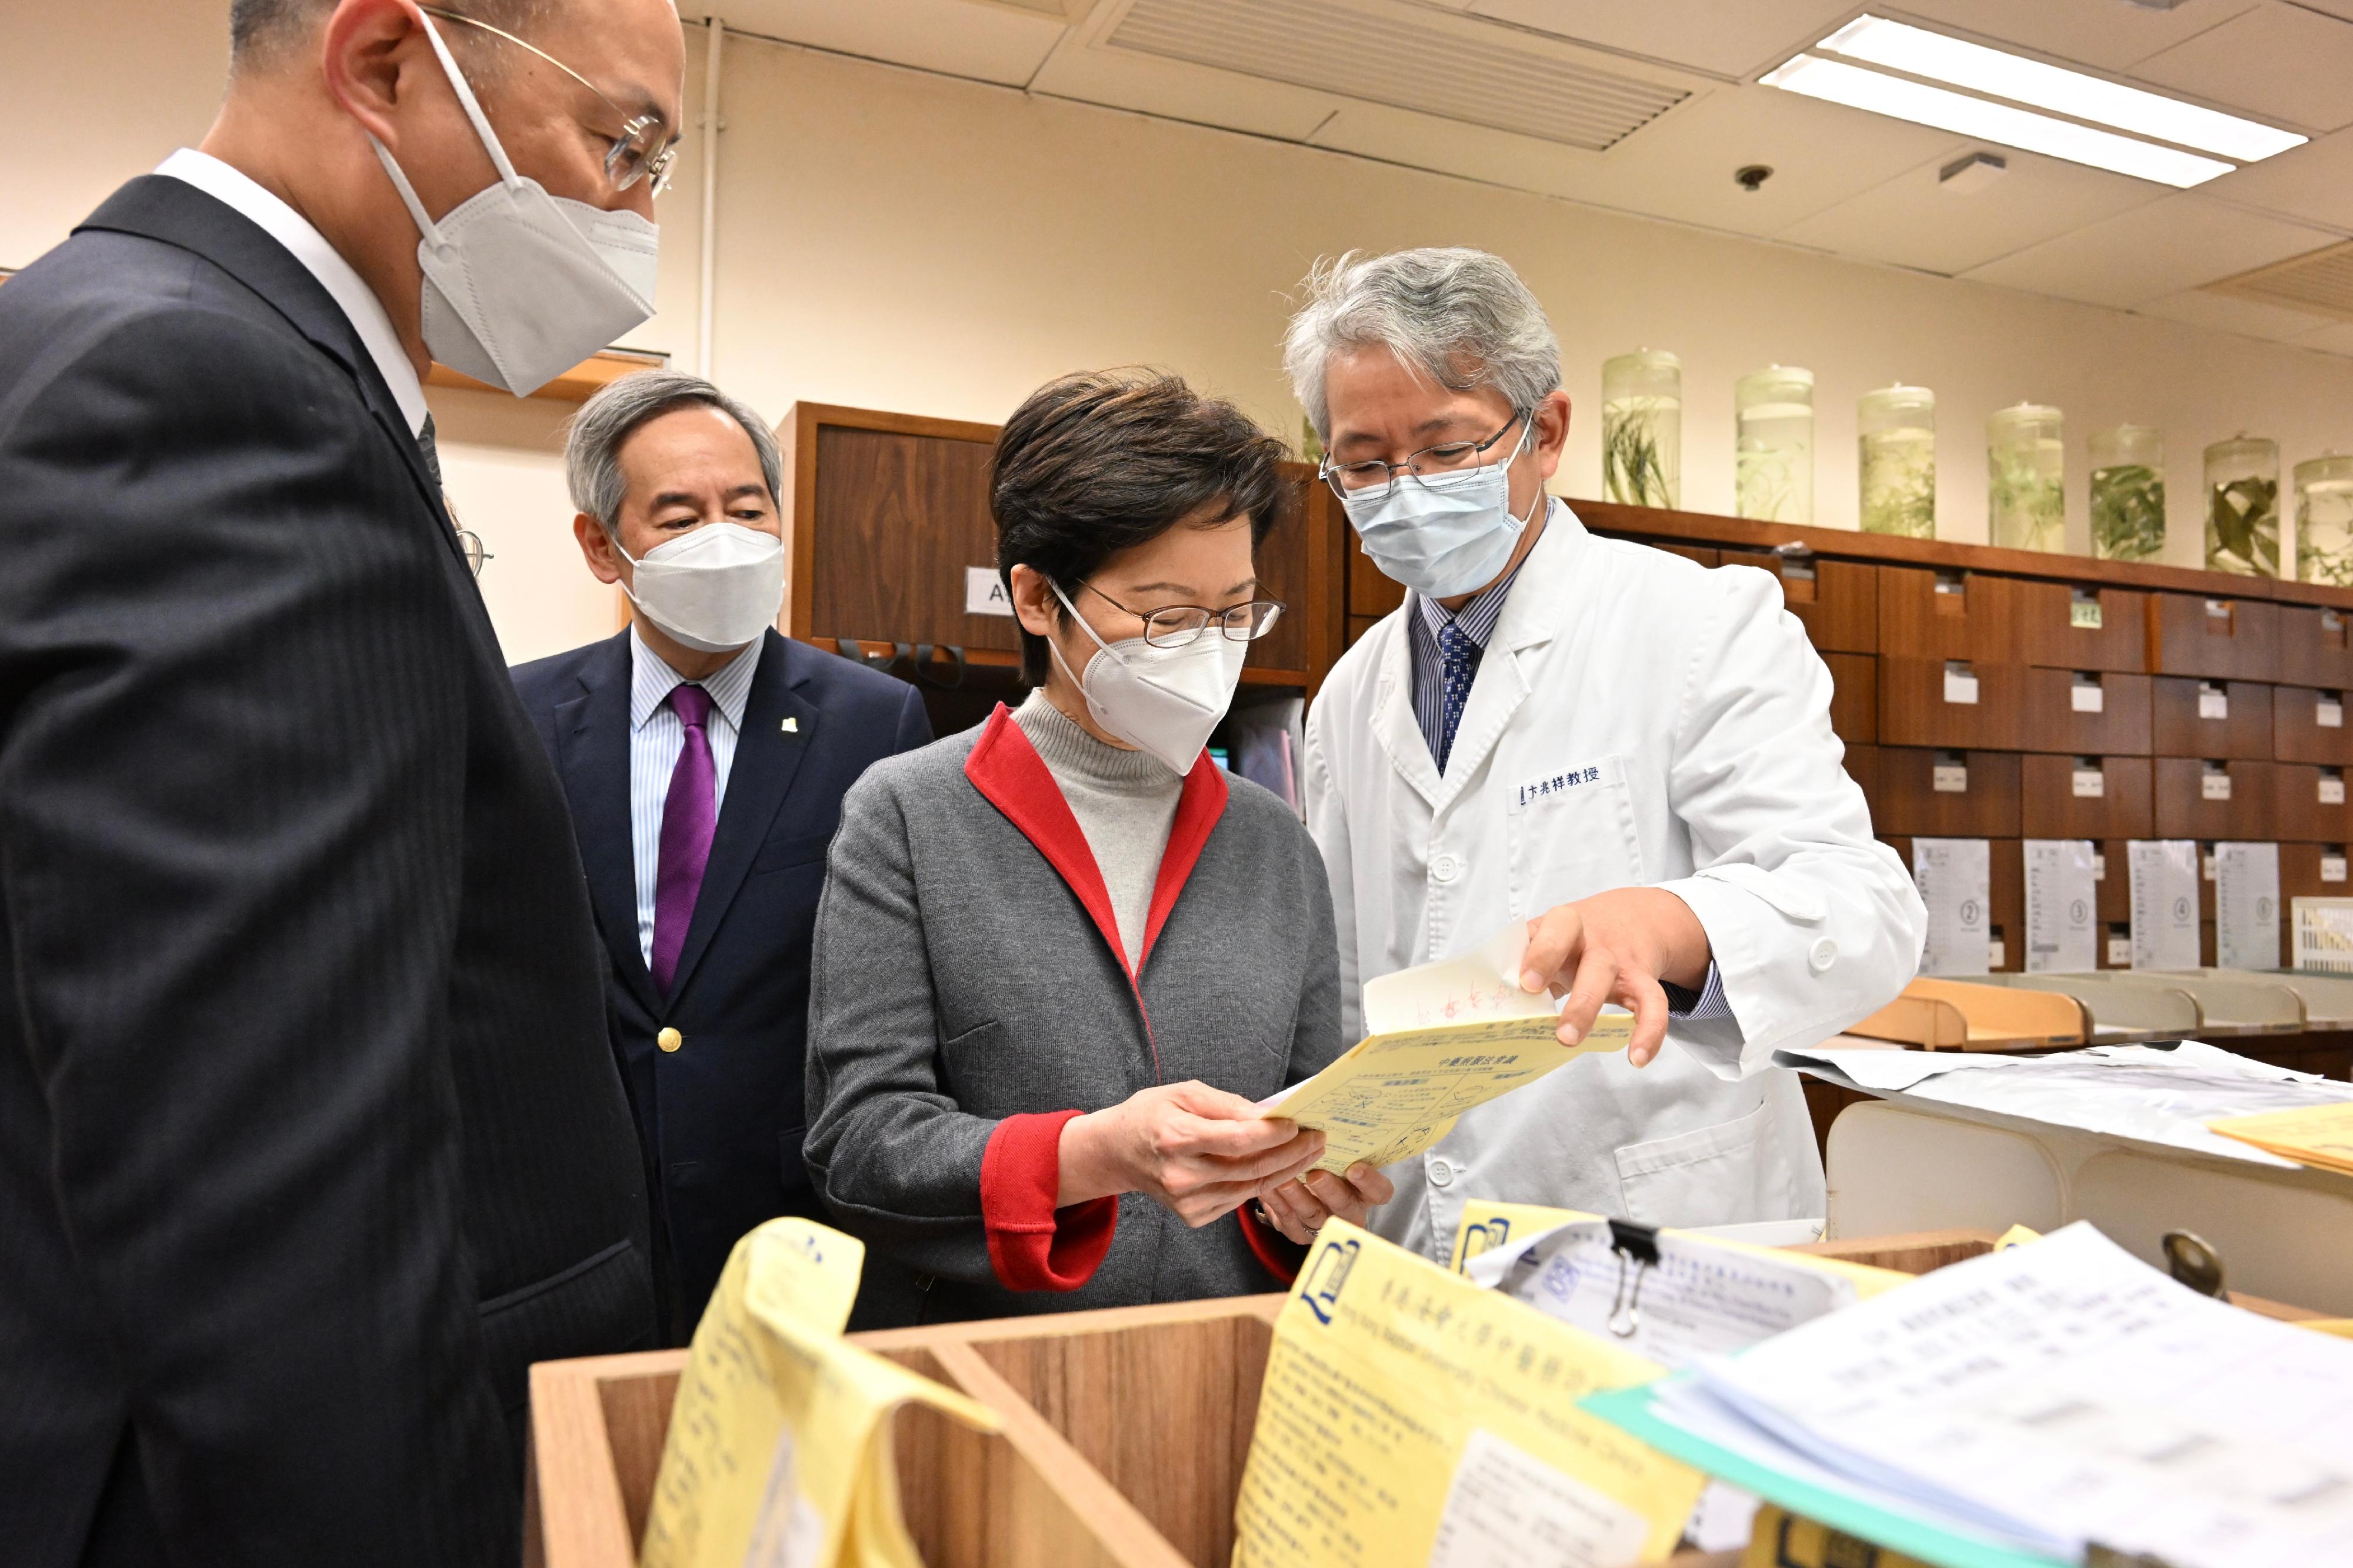 The Chief Executive, Mrs Carrie Lam, visited the Chinese Medicine Telemedicine Centre Against COVID-19 of the Hong Kong Baptist University (HKBU) today (March 12). Photo shows Mrs Lam (second right) inspecting the operation of the dispensary. Looking on are the Chairman of the Council of HKBU, Dr Clement Chen (second left); the President and Vice-Chancellor of HKBU, Professor Alexander Wai (first left); and the Associate Vice-President (Chinese Medicine Development) and Director of the Clinical Division of the School of Chinese Medicine of HKBU, Professor Bian Zhaoxiang (first right).